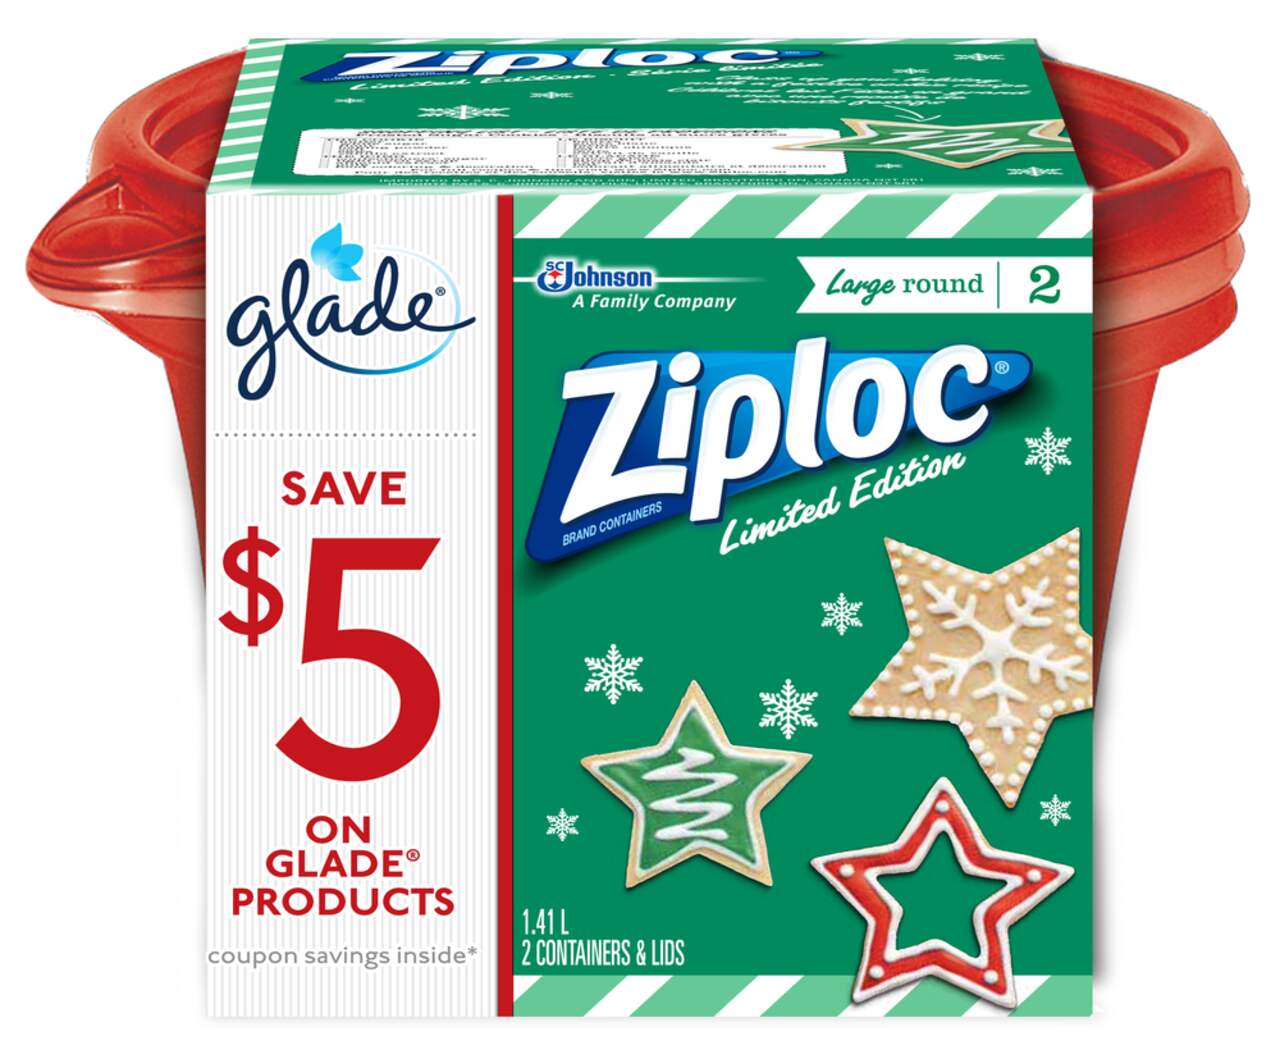  Ziploc Limited Edition Christmas Containers (Red/Gold) : Health  & Household